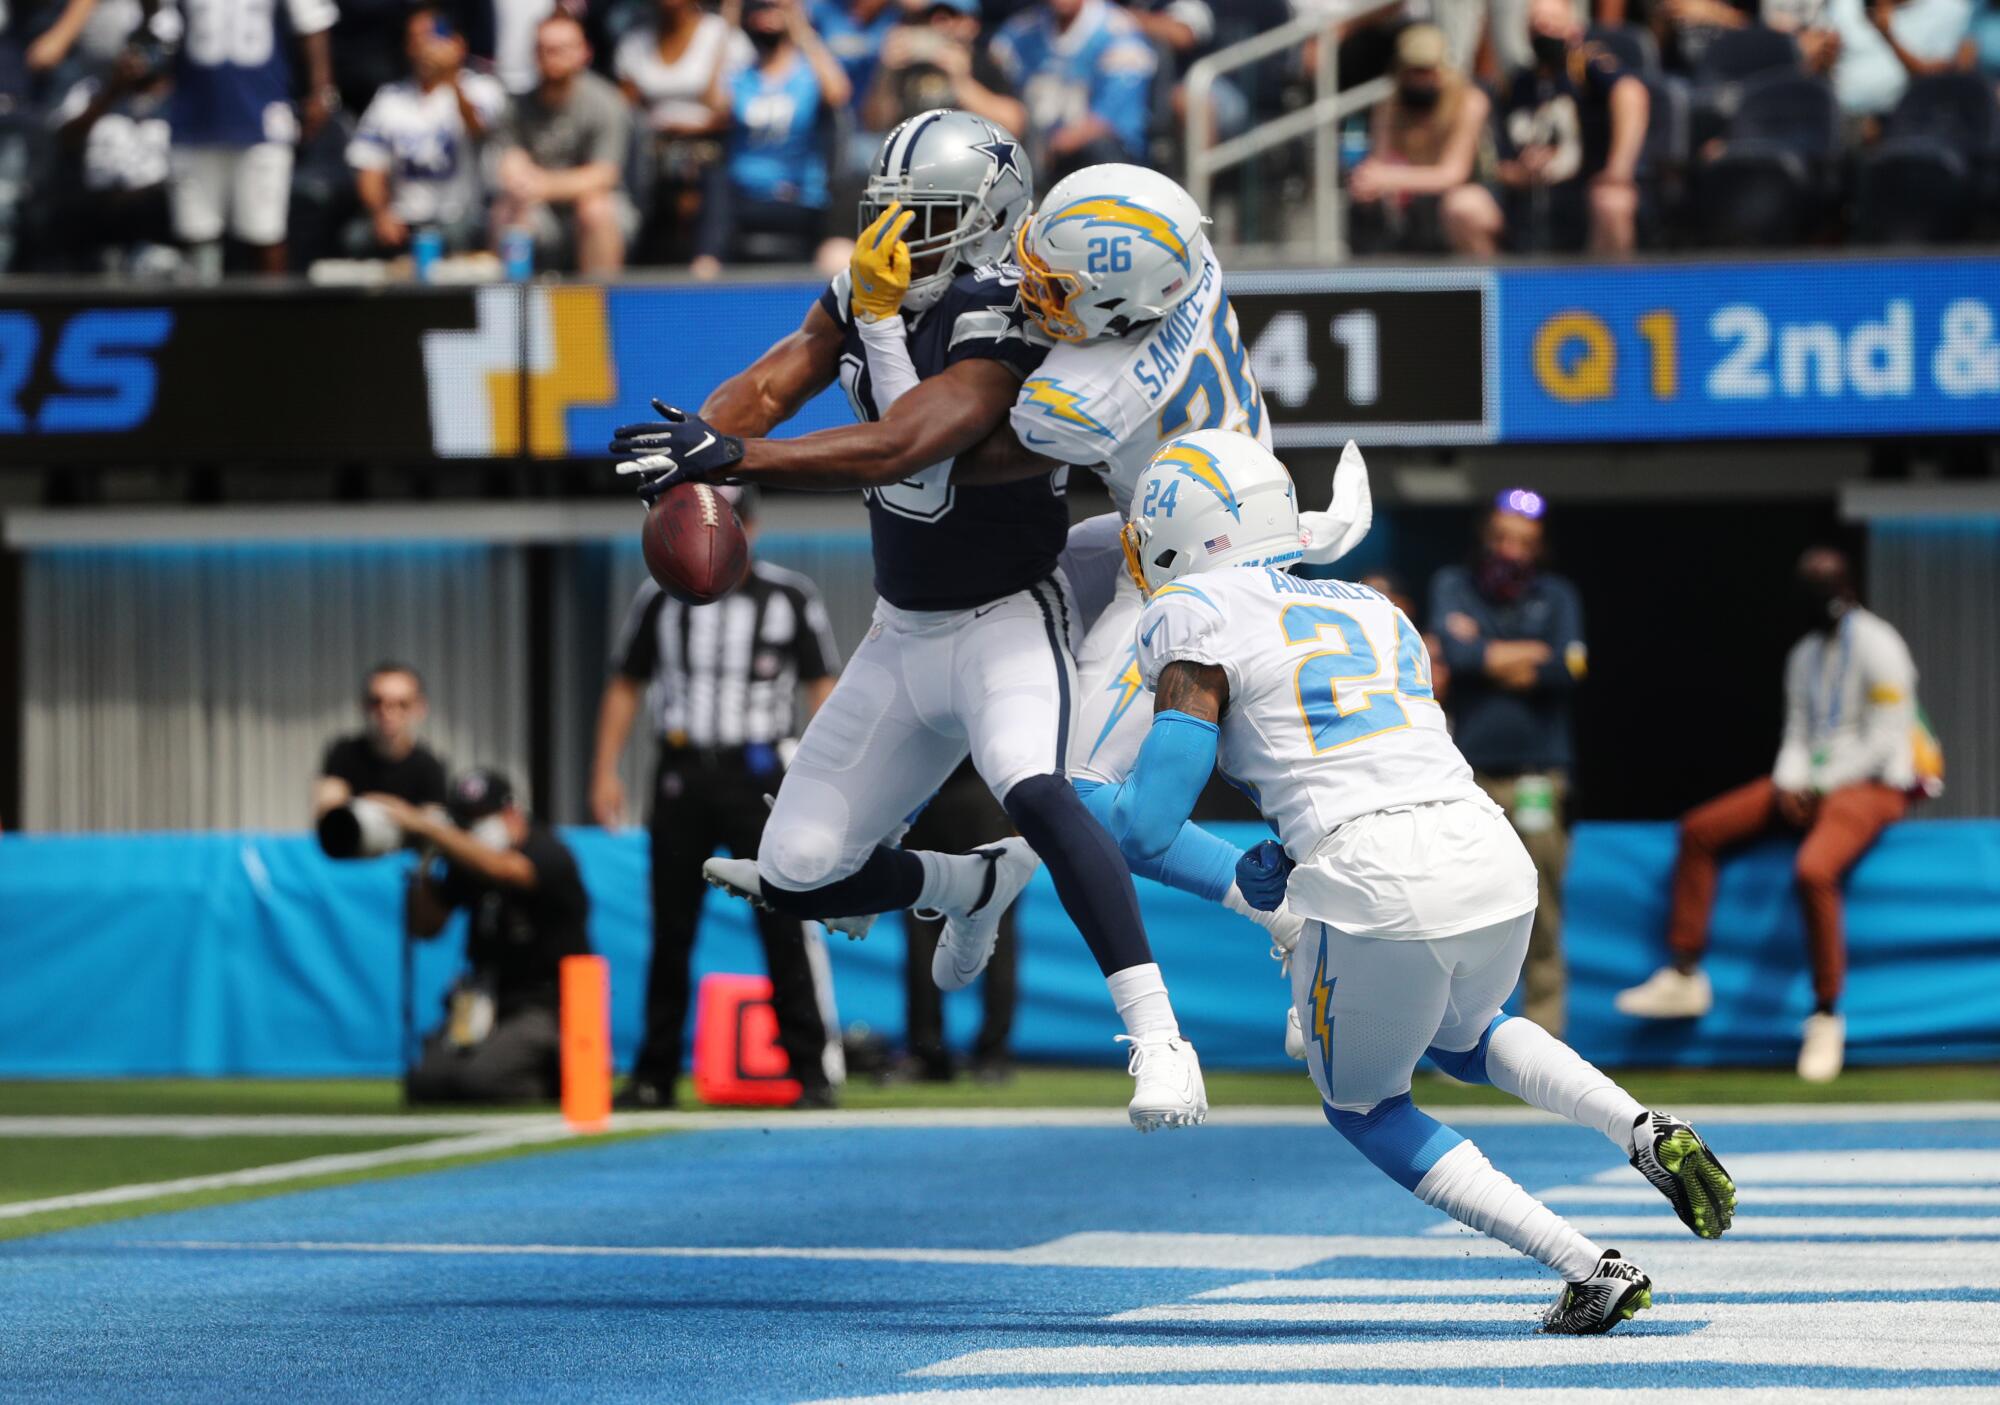 Chargers cornerback Asante Samuel Jr. (26) breaks up a pass intended for Dallas Cowboys wide receiver Amari Cooper.